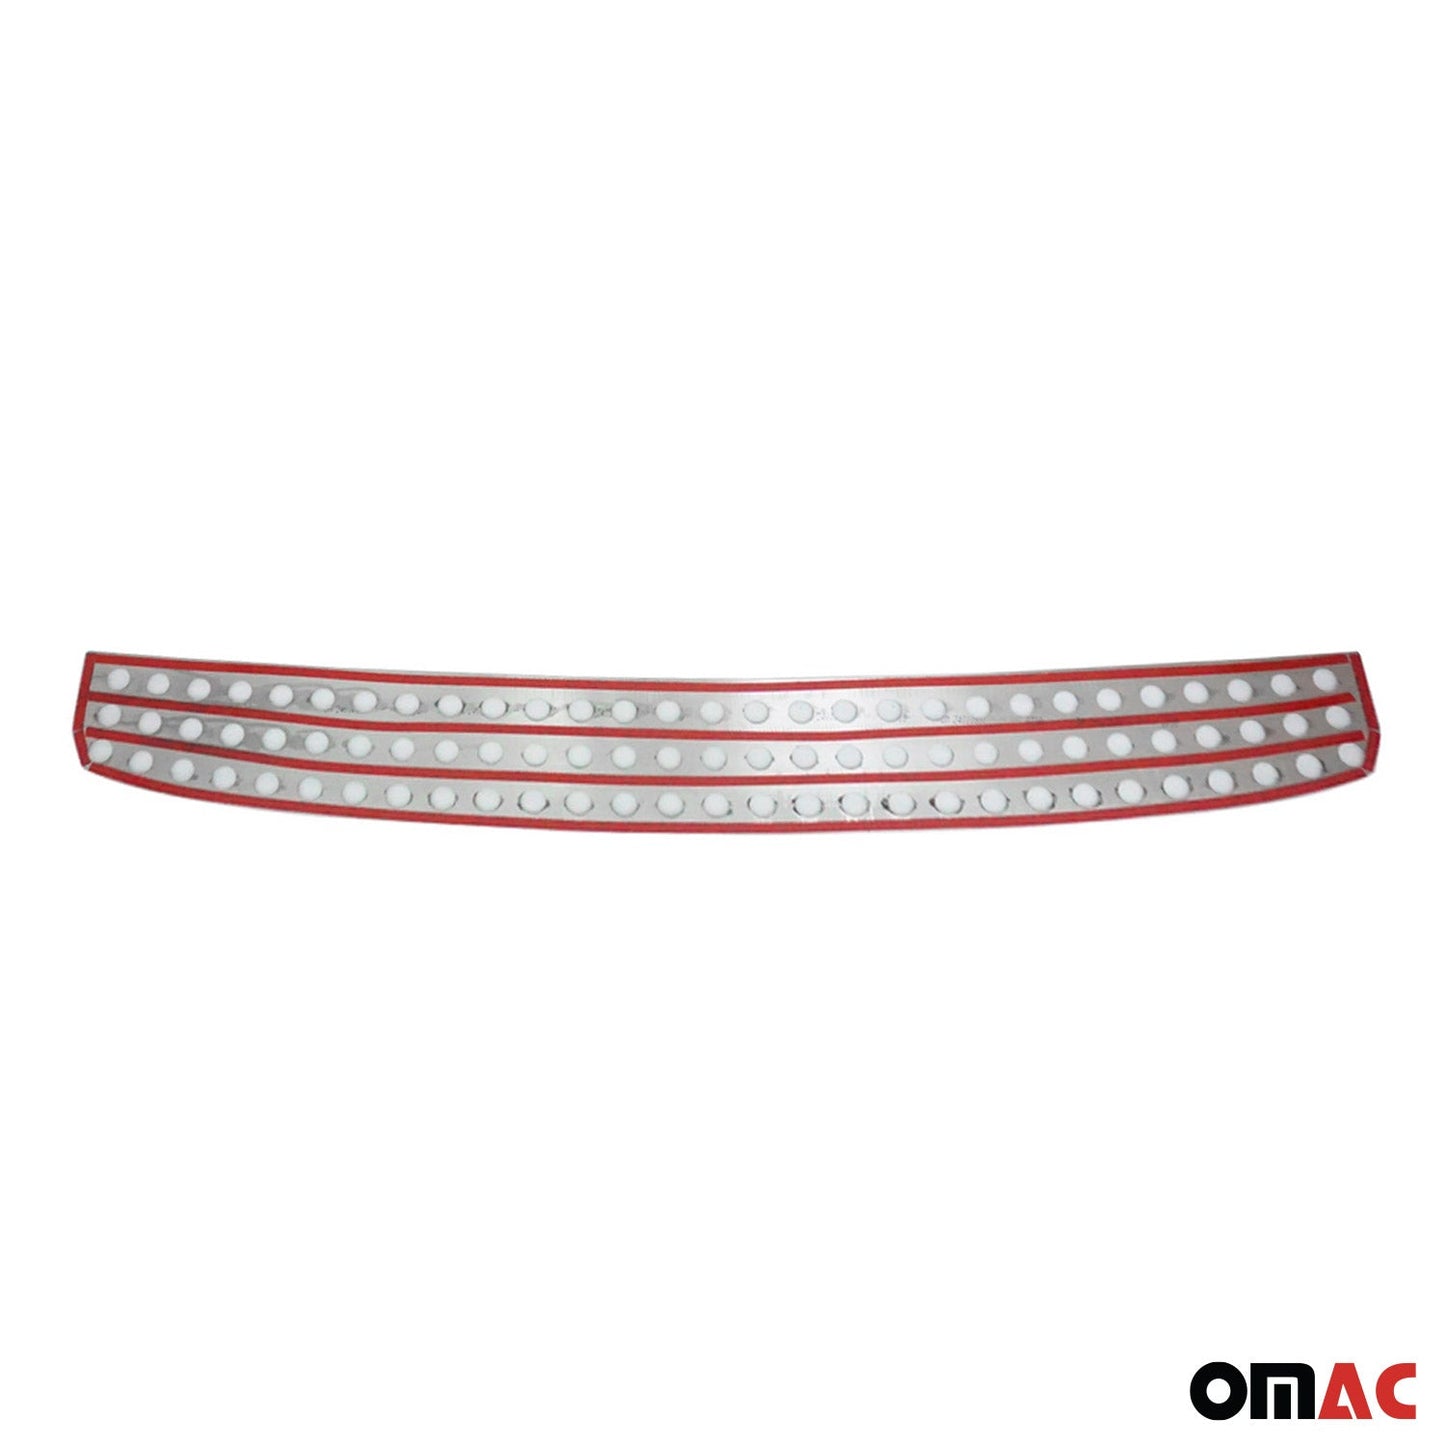 OMAC Rear Bumper Sill Cover Protector Guard for Dodge Nitro 2007-2012 Brushed Steel 2401093T